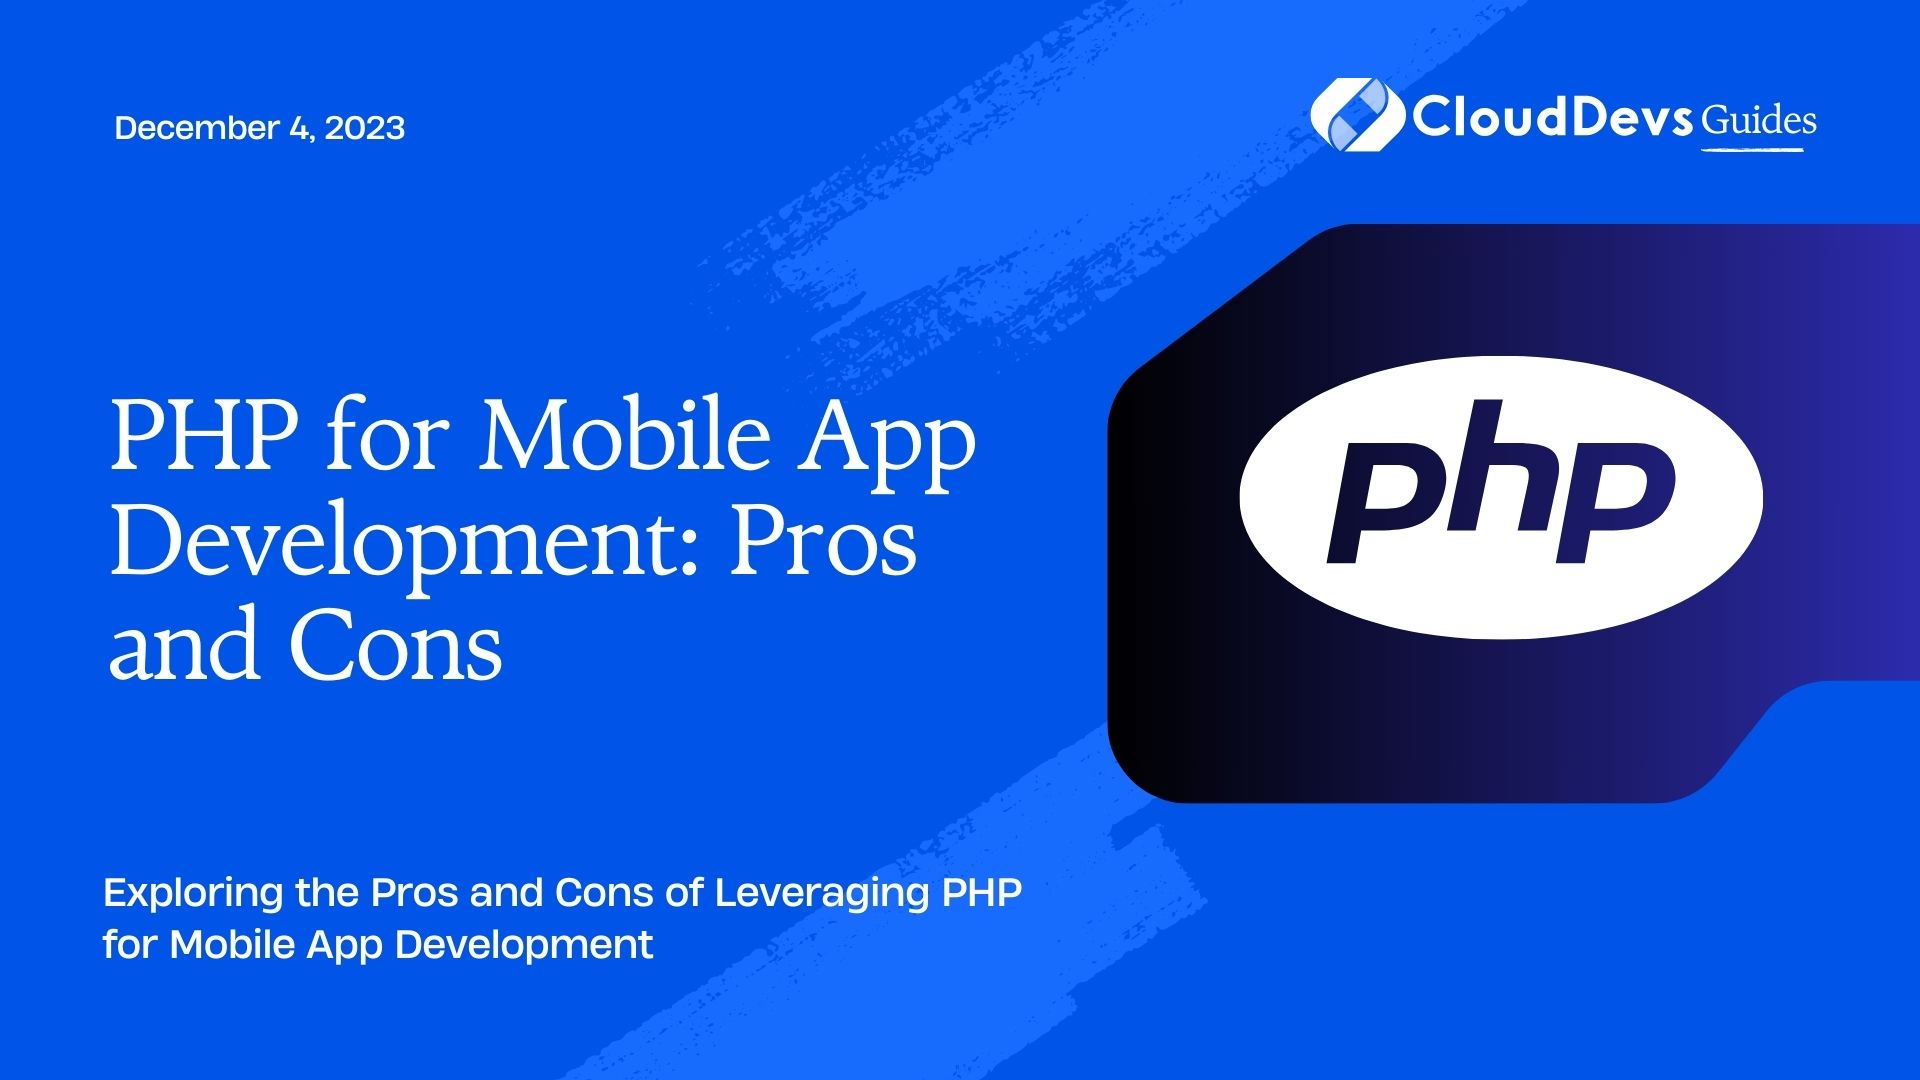 PHP for Mobile App Development: Pros and Cons